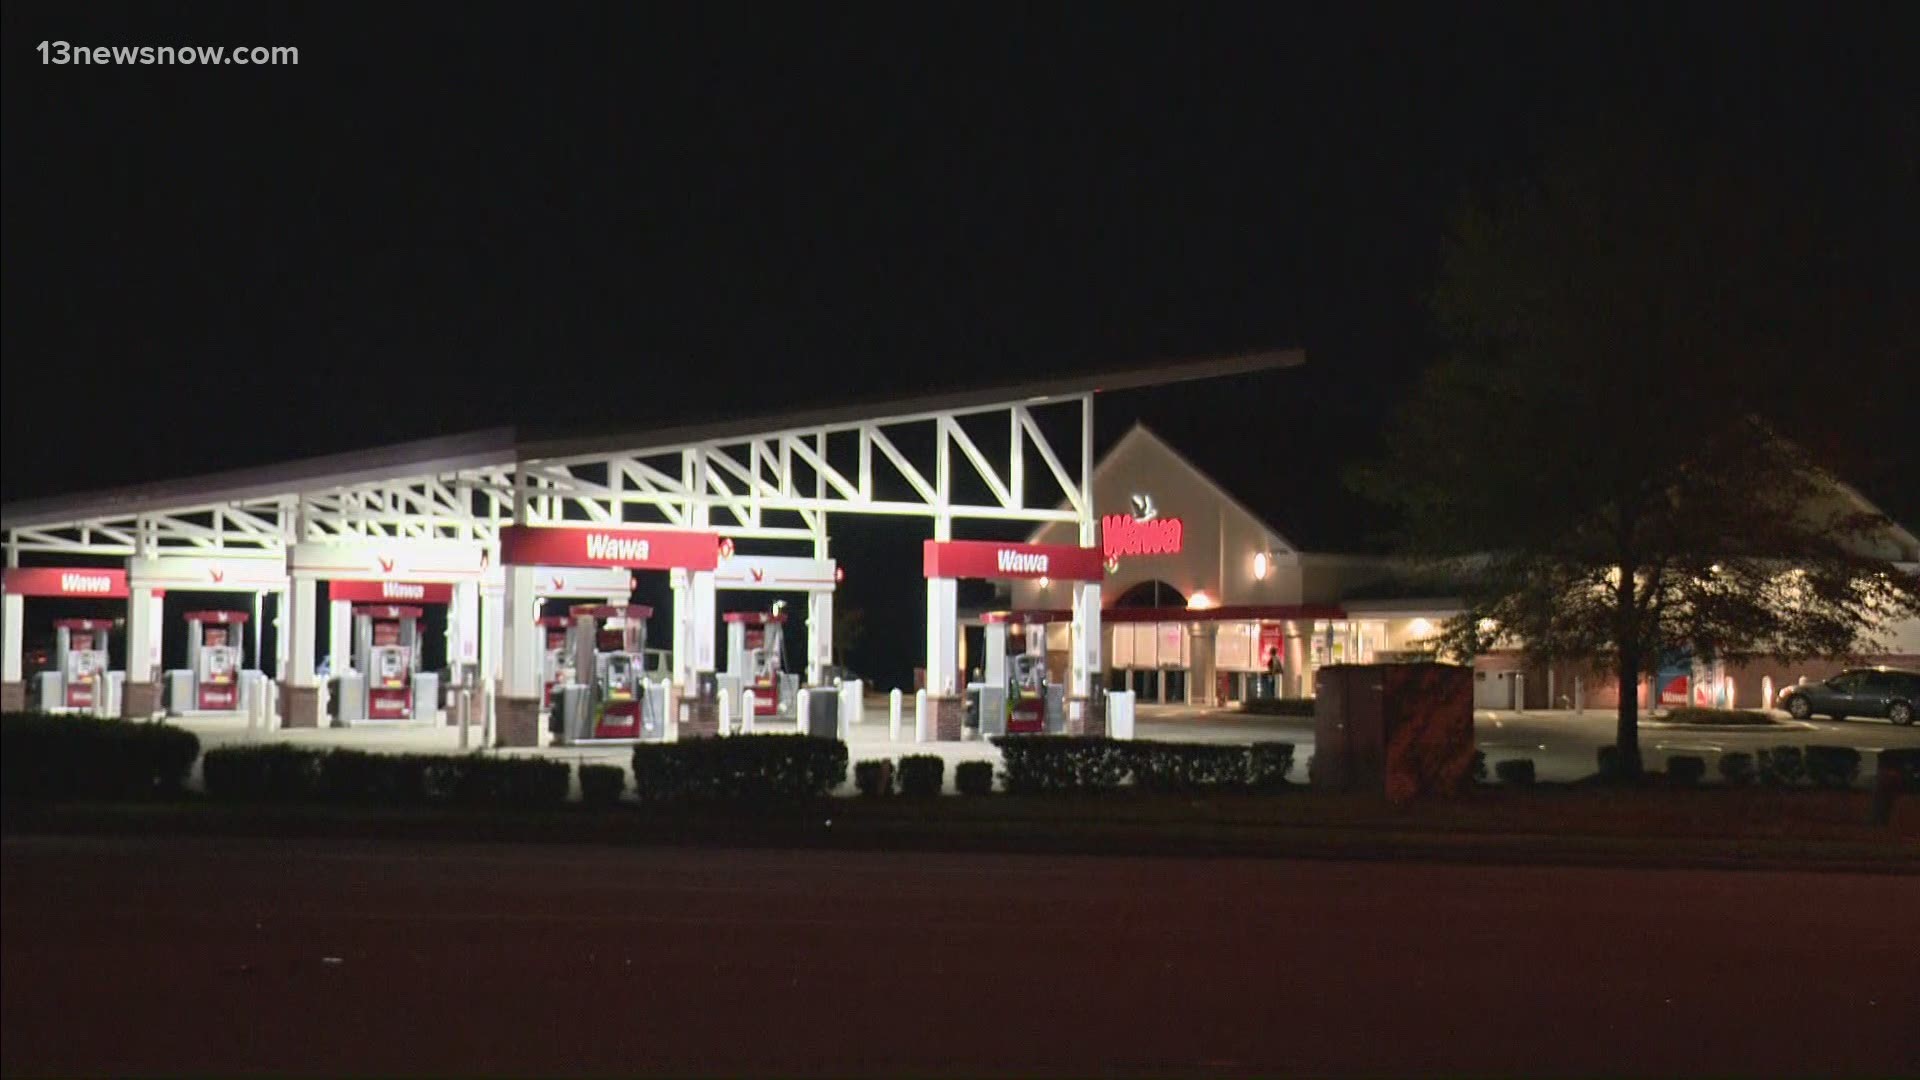 Police were called to the Wawa on Woodlake Avenue, where they found a person shot multiple times.